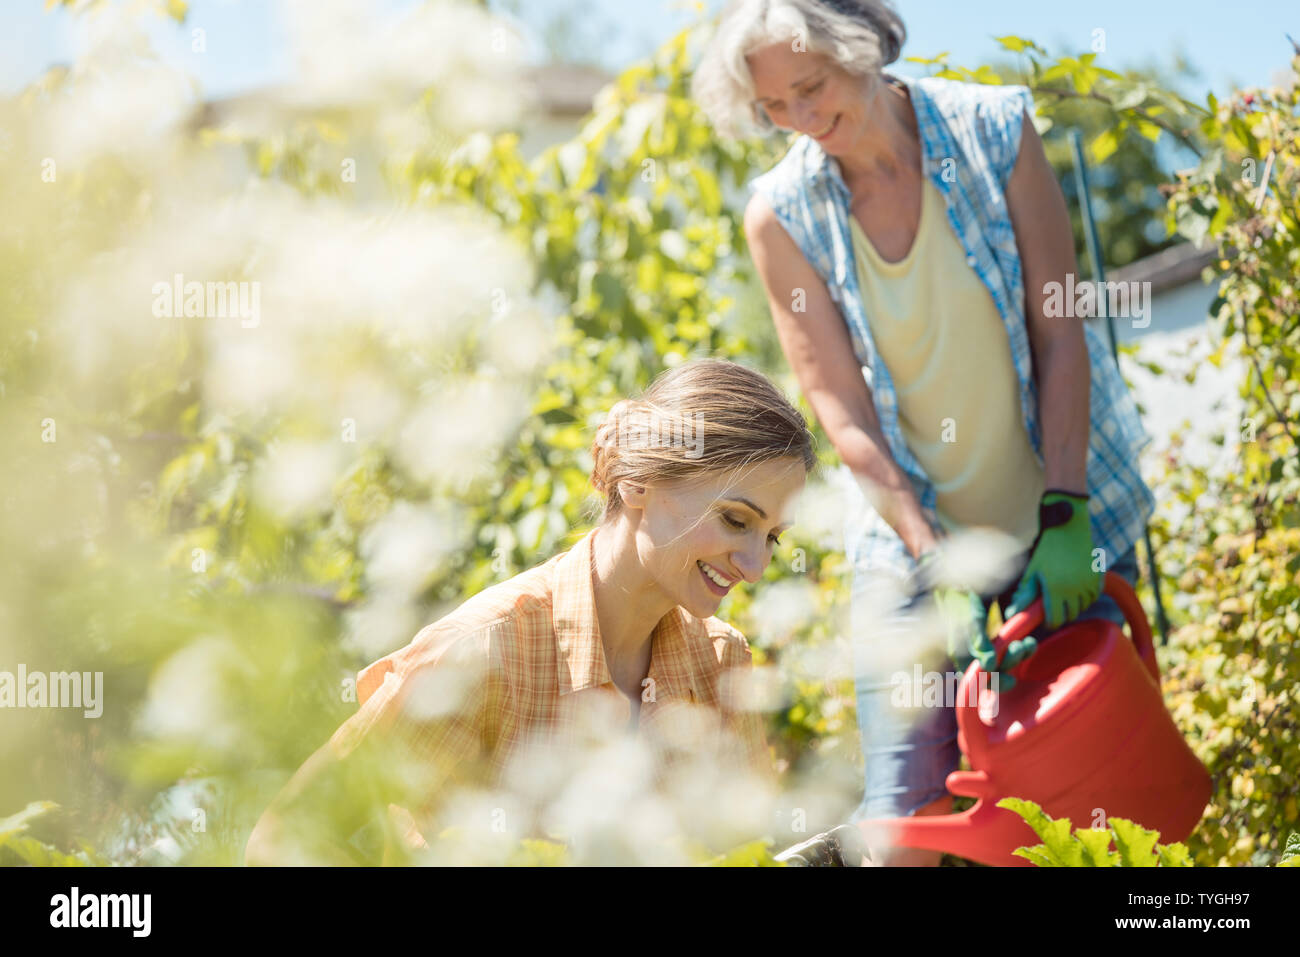 Senior and young woman gardening together Stock Photo